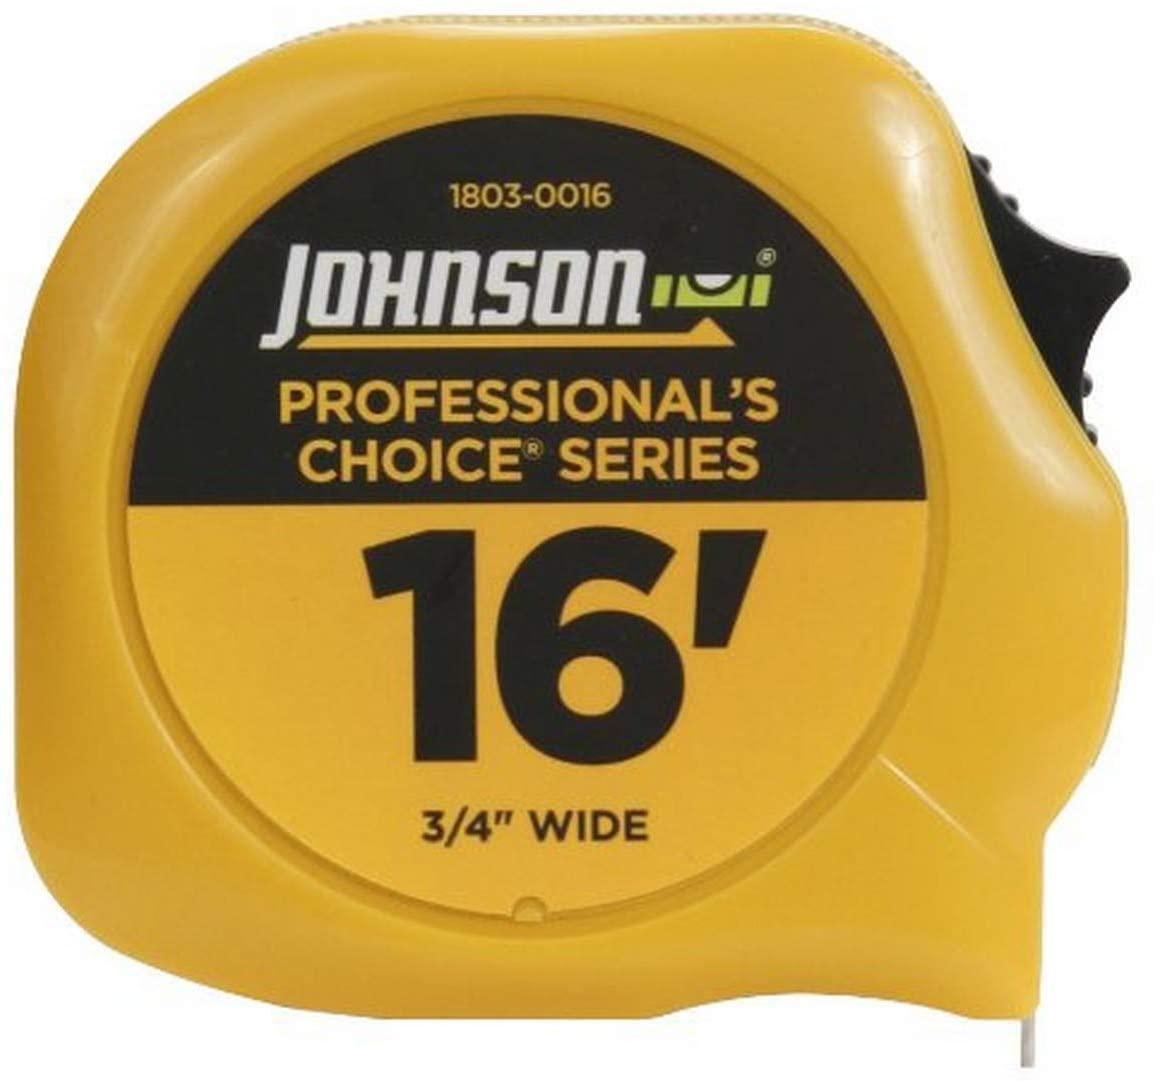 Johnson Level and Tool 16ft Power Measuring Tape for $4.99